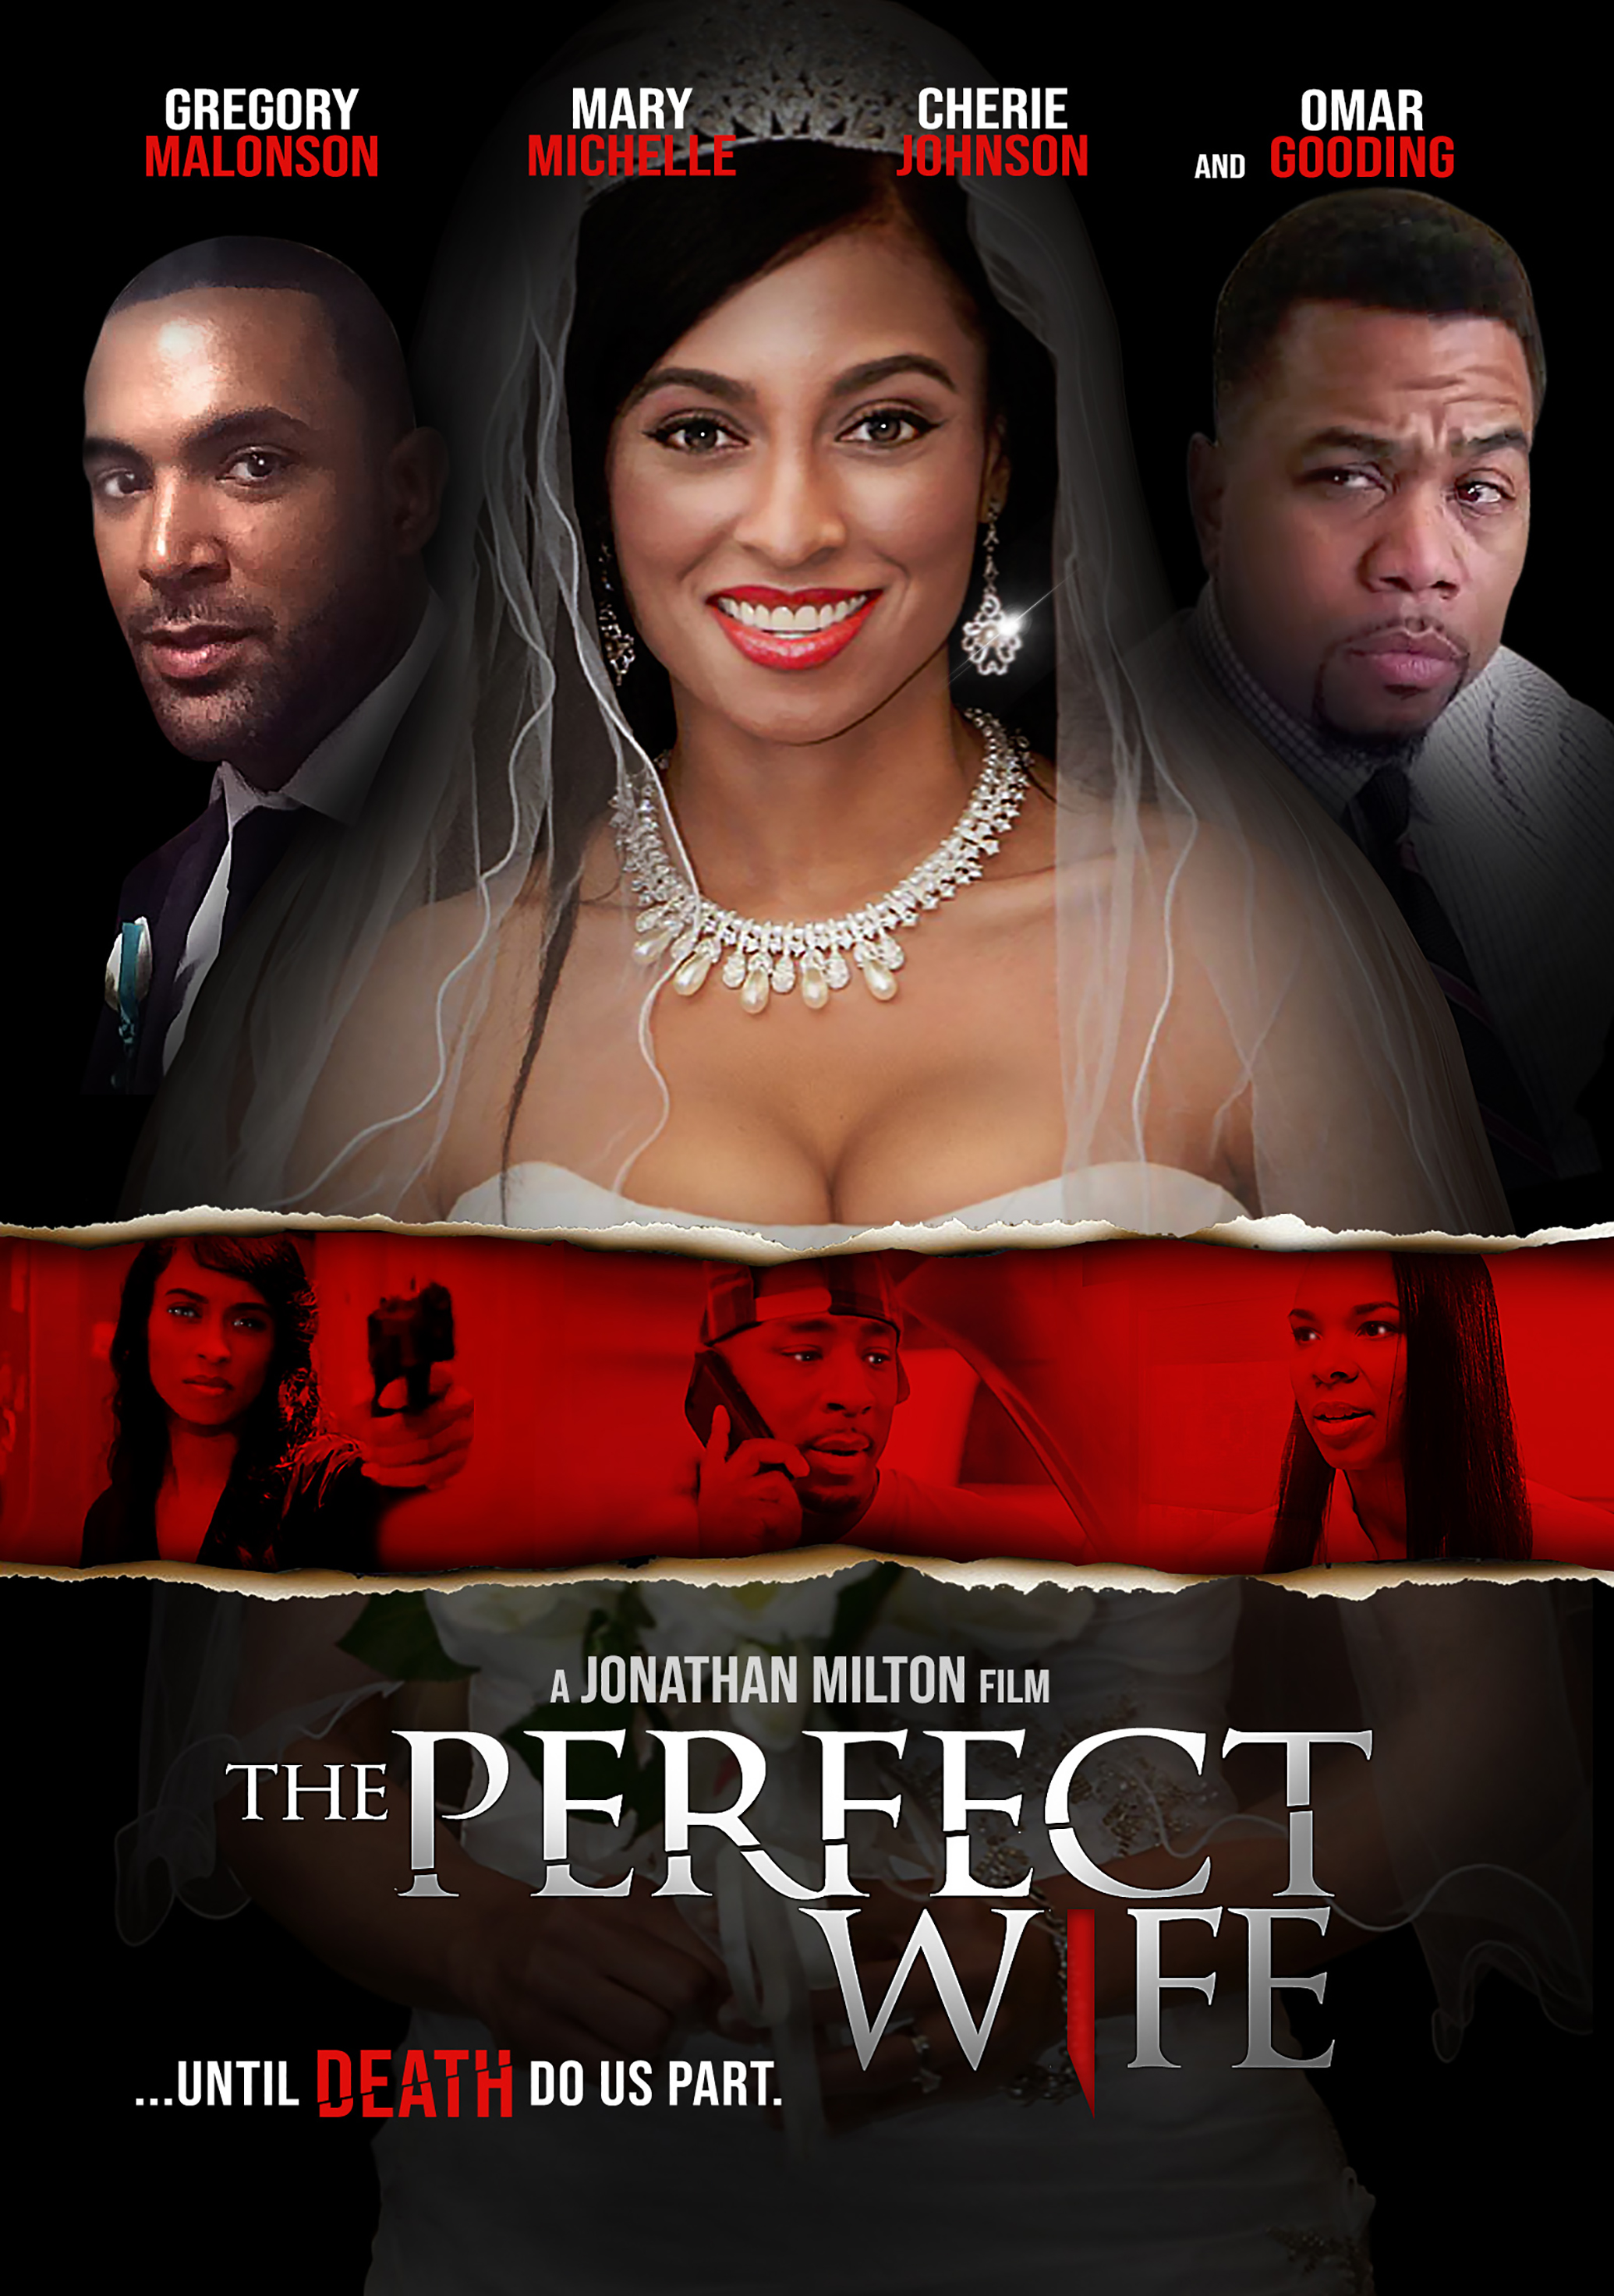 The Perfect Wife (2016) Thriller, Directed By Jonathan Milton